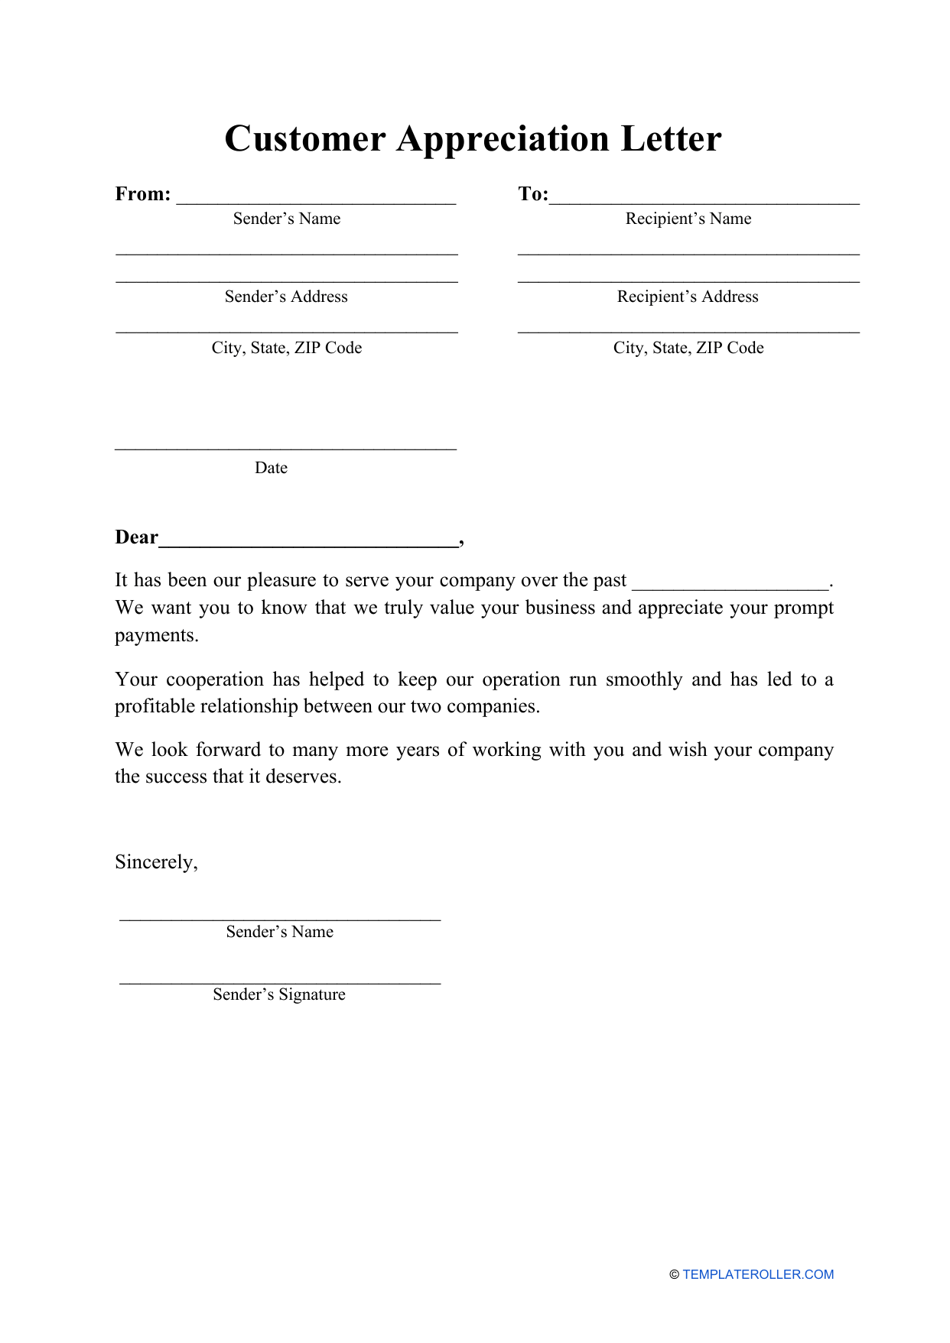 Customer Appreciation Letter Sample - Free to Download